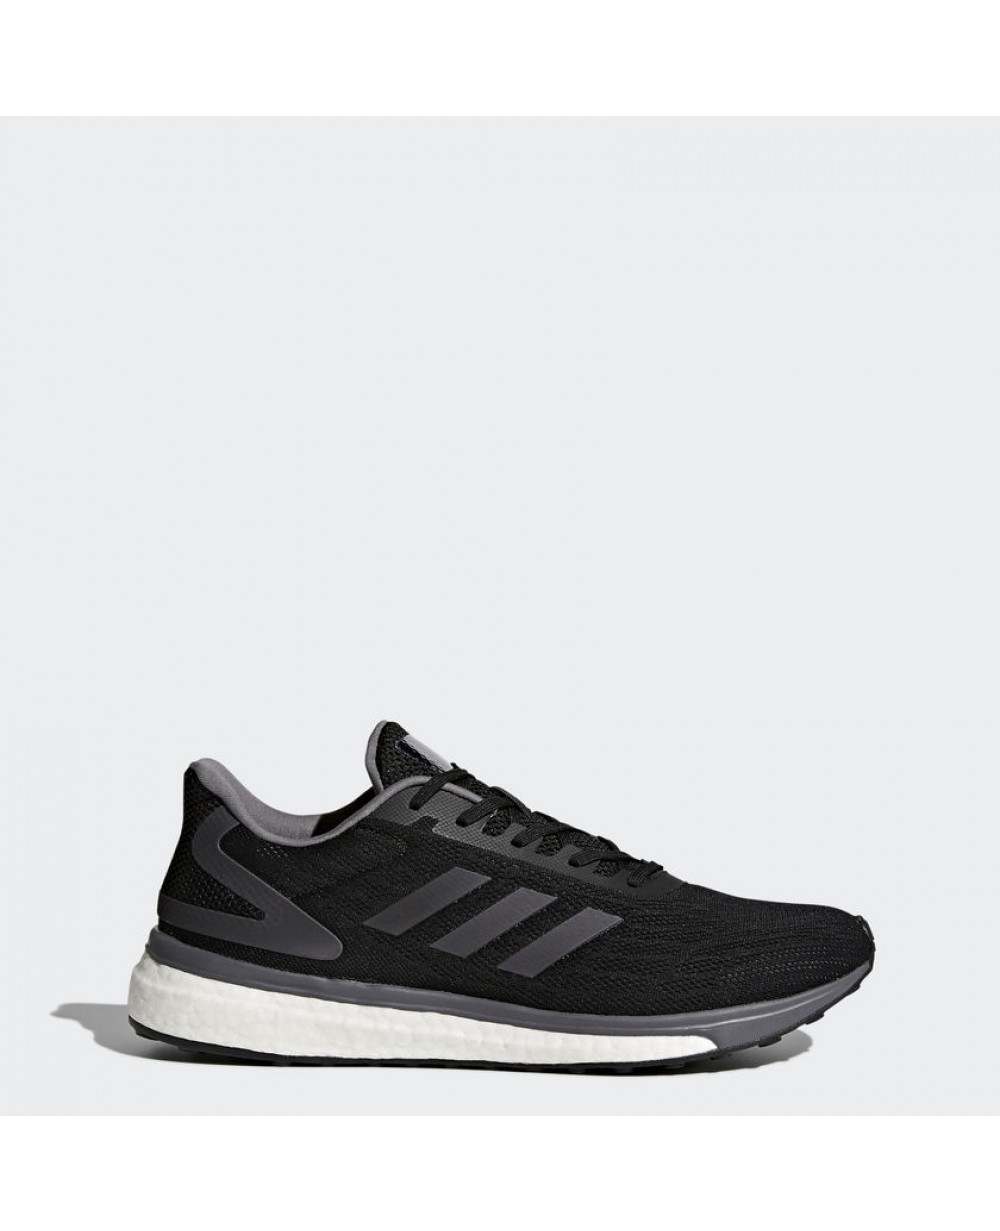 Adidas Response Lite Running Shoes For BB3617